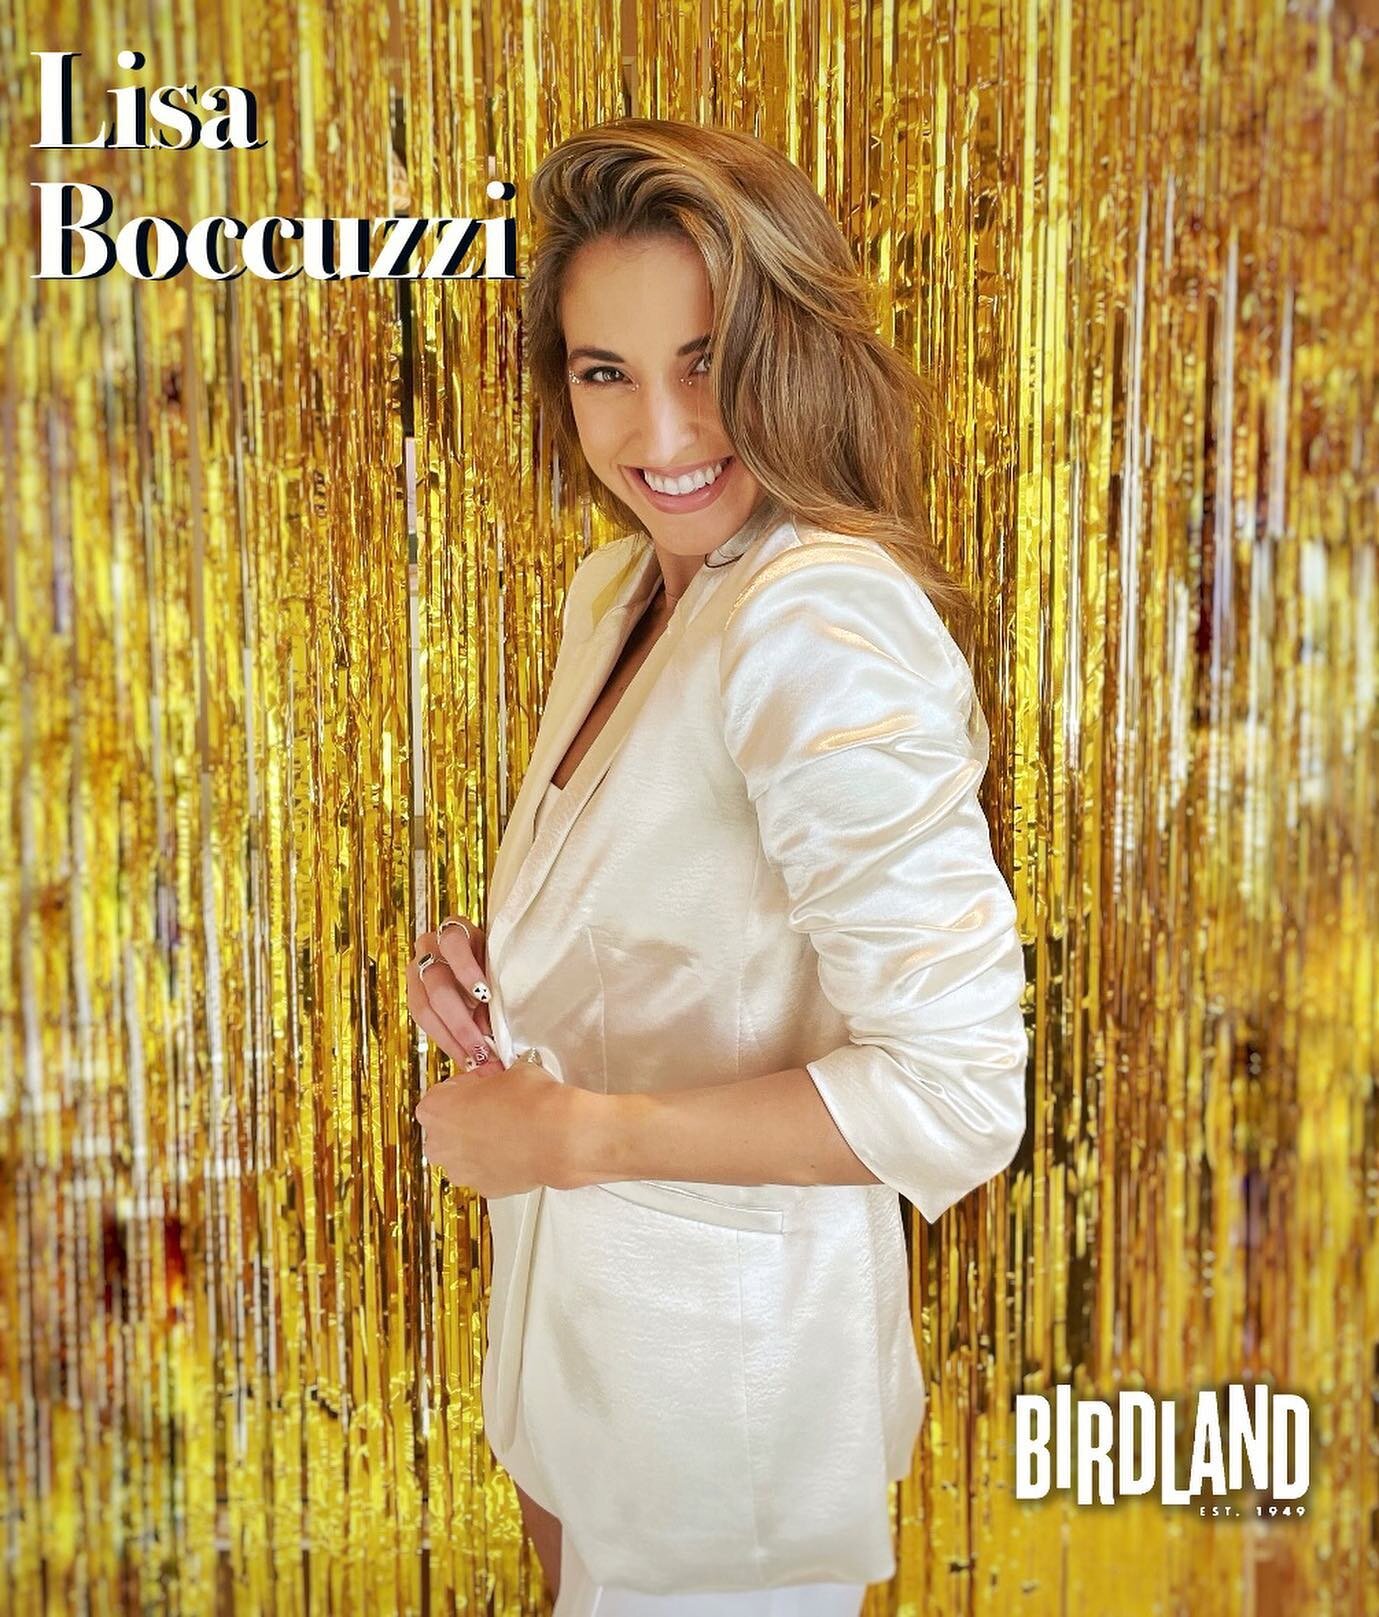 NYC please welcome my amazing guest performer, @lisaboccuzzi for my Dec 12th show at @birdlandjazz!!! Not only is Lisa an amazing performer, she&rsquo;s one of the ✨ sparkliest ✨ people I know!!! 🎄 ❄️ 🎻 🎶 We&rsquo;ll be led by pianist and MD extra